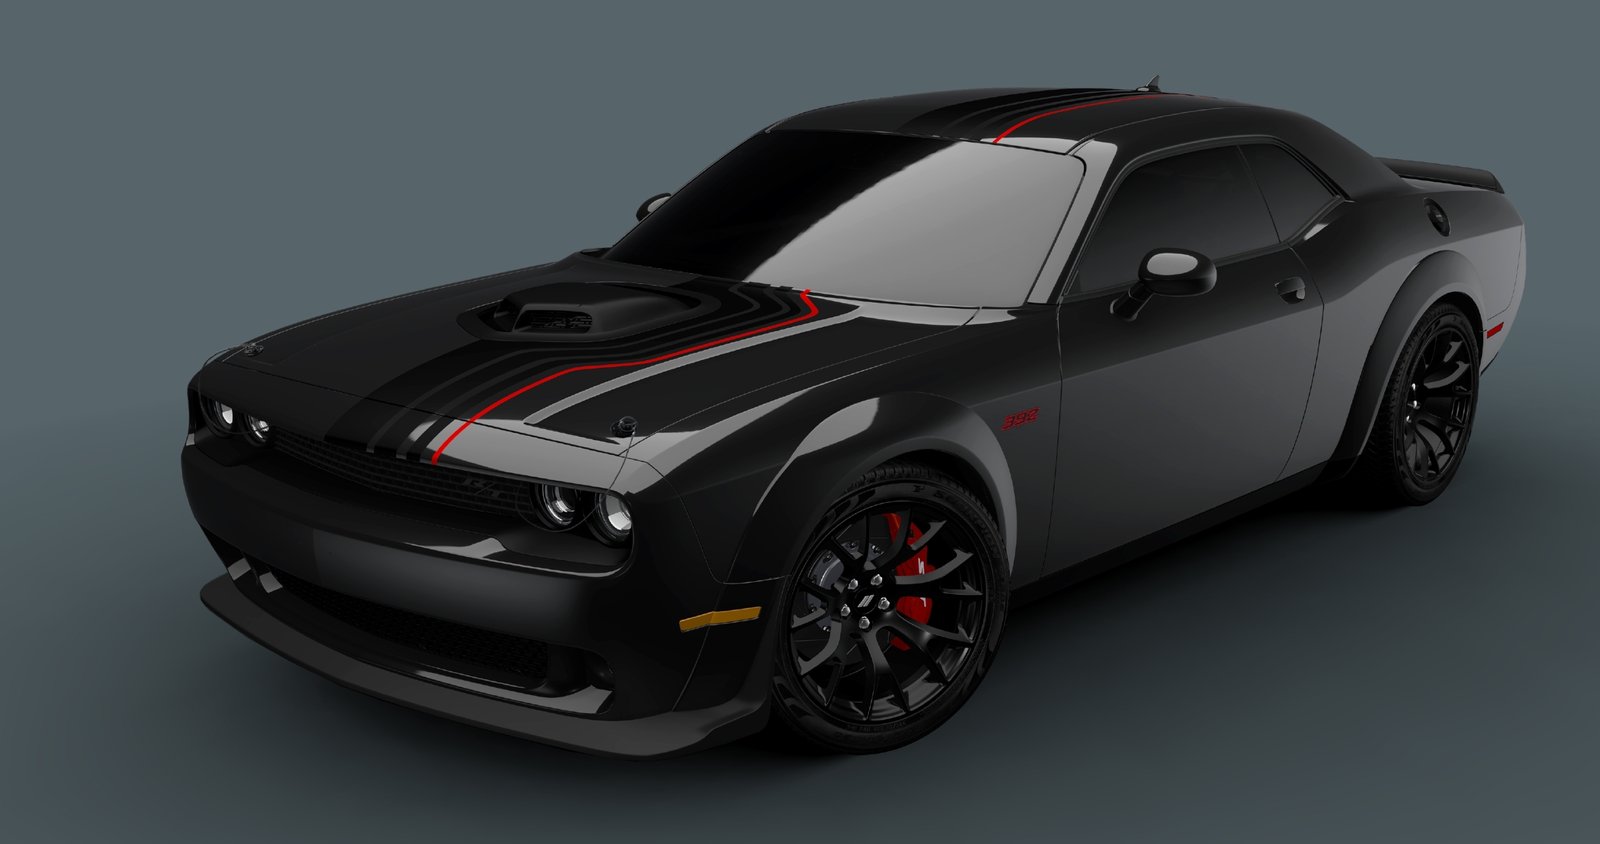 The 2023 Dodge Challenger Shakedown pays tribute the original Do